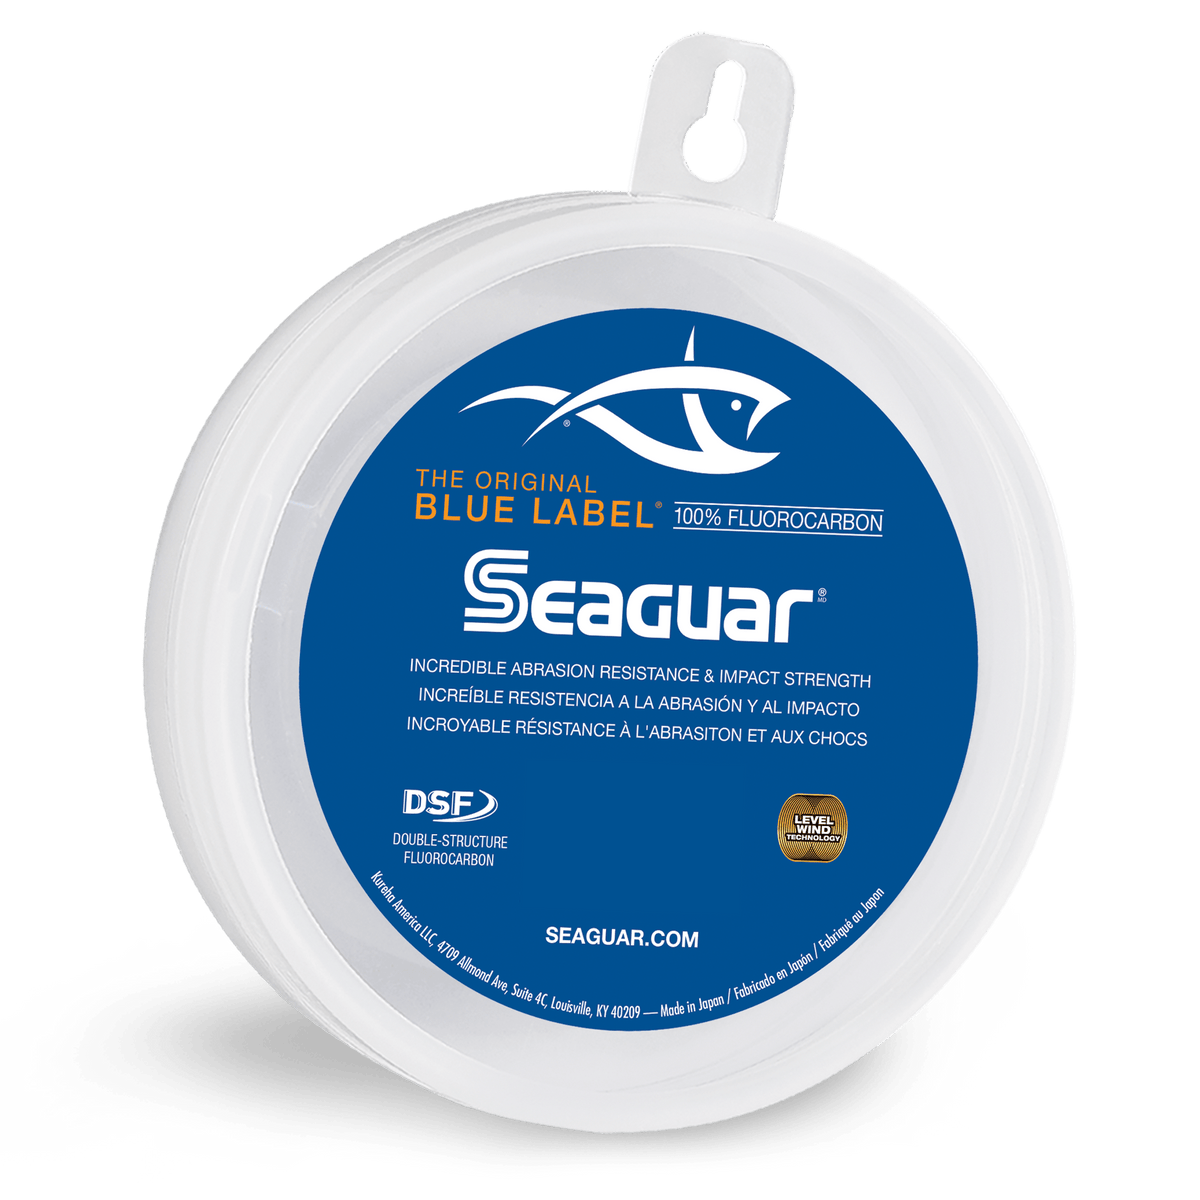 Blue Saltwater Braided Fishing Fishing Lines & Leaders for sale